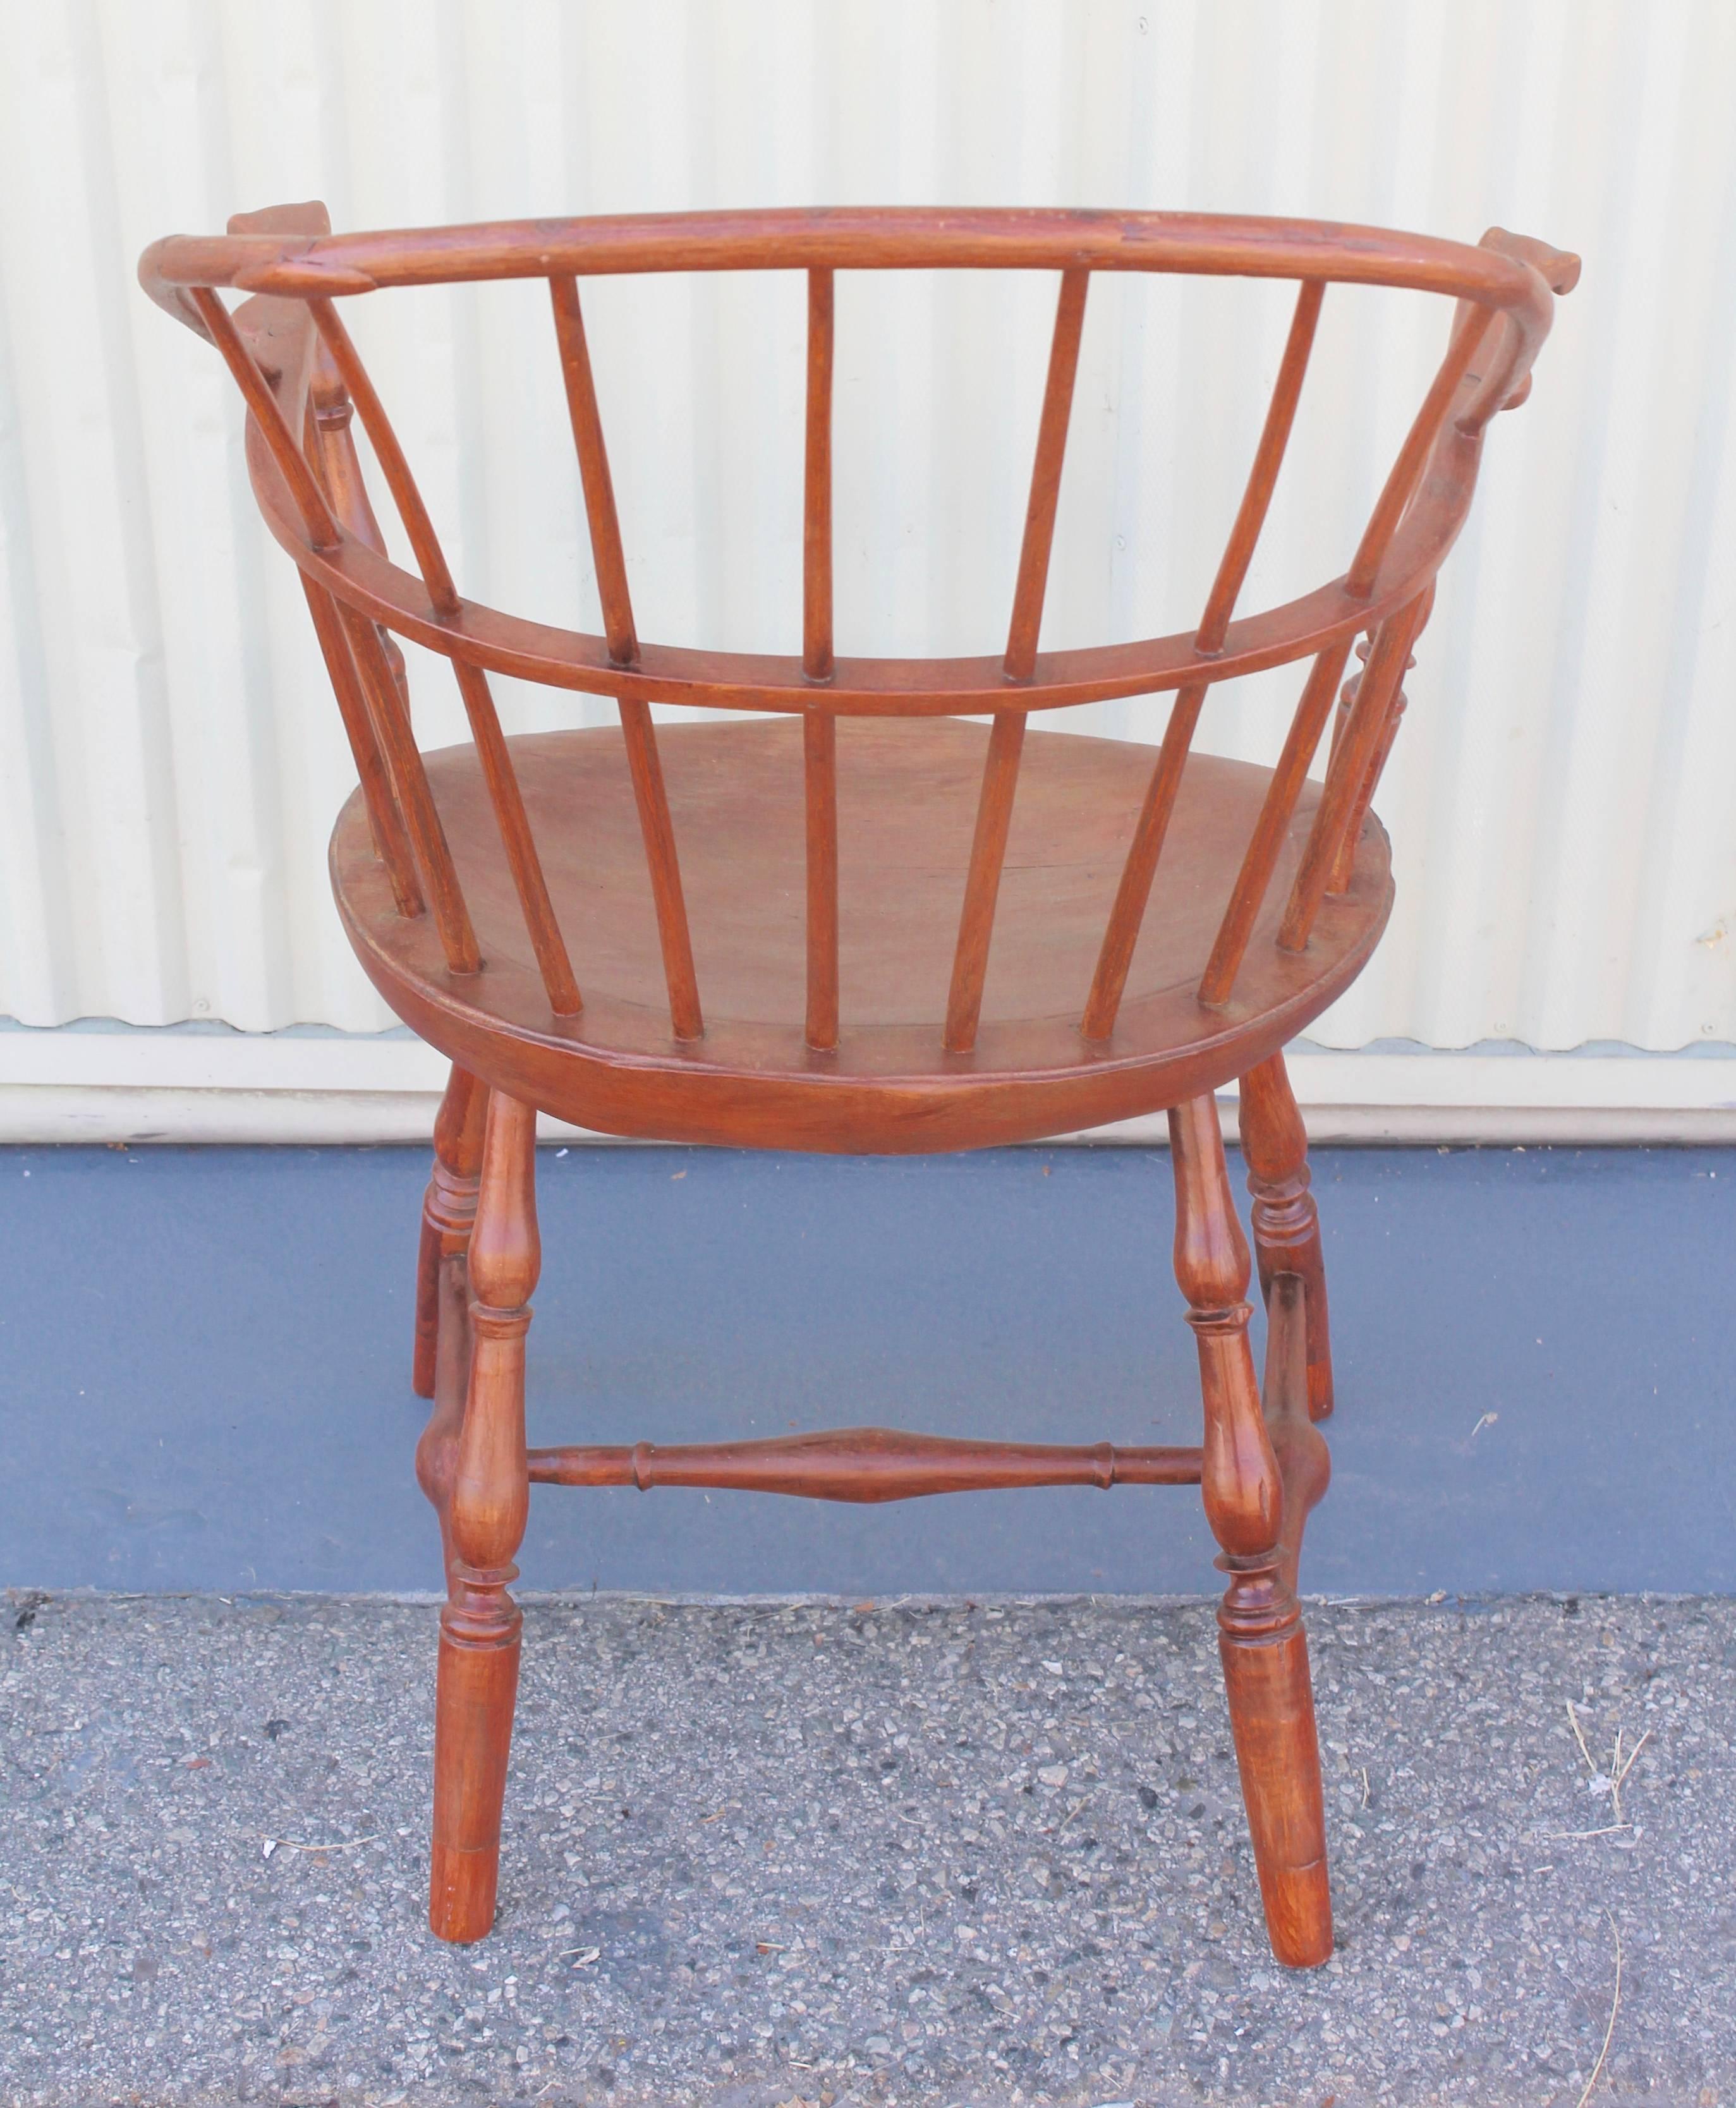 Hand-Crafted 18th Century Salmon Painted Knuckle Arm Windsor Chair